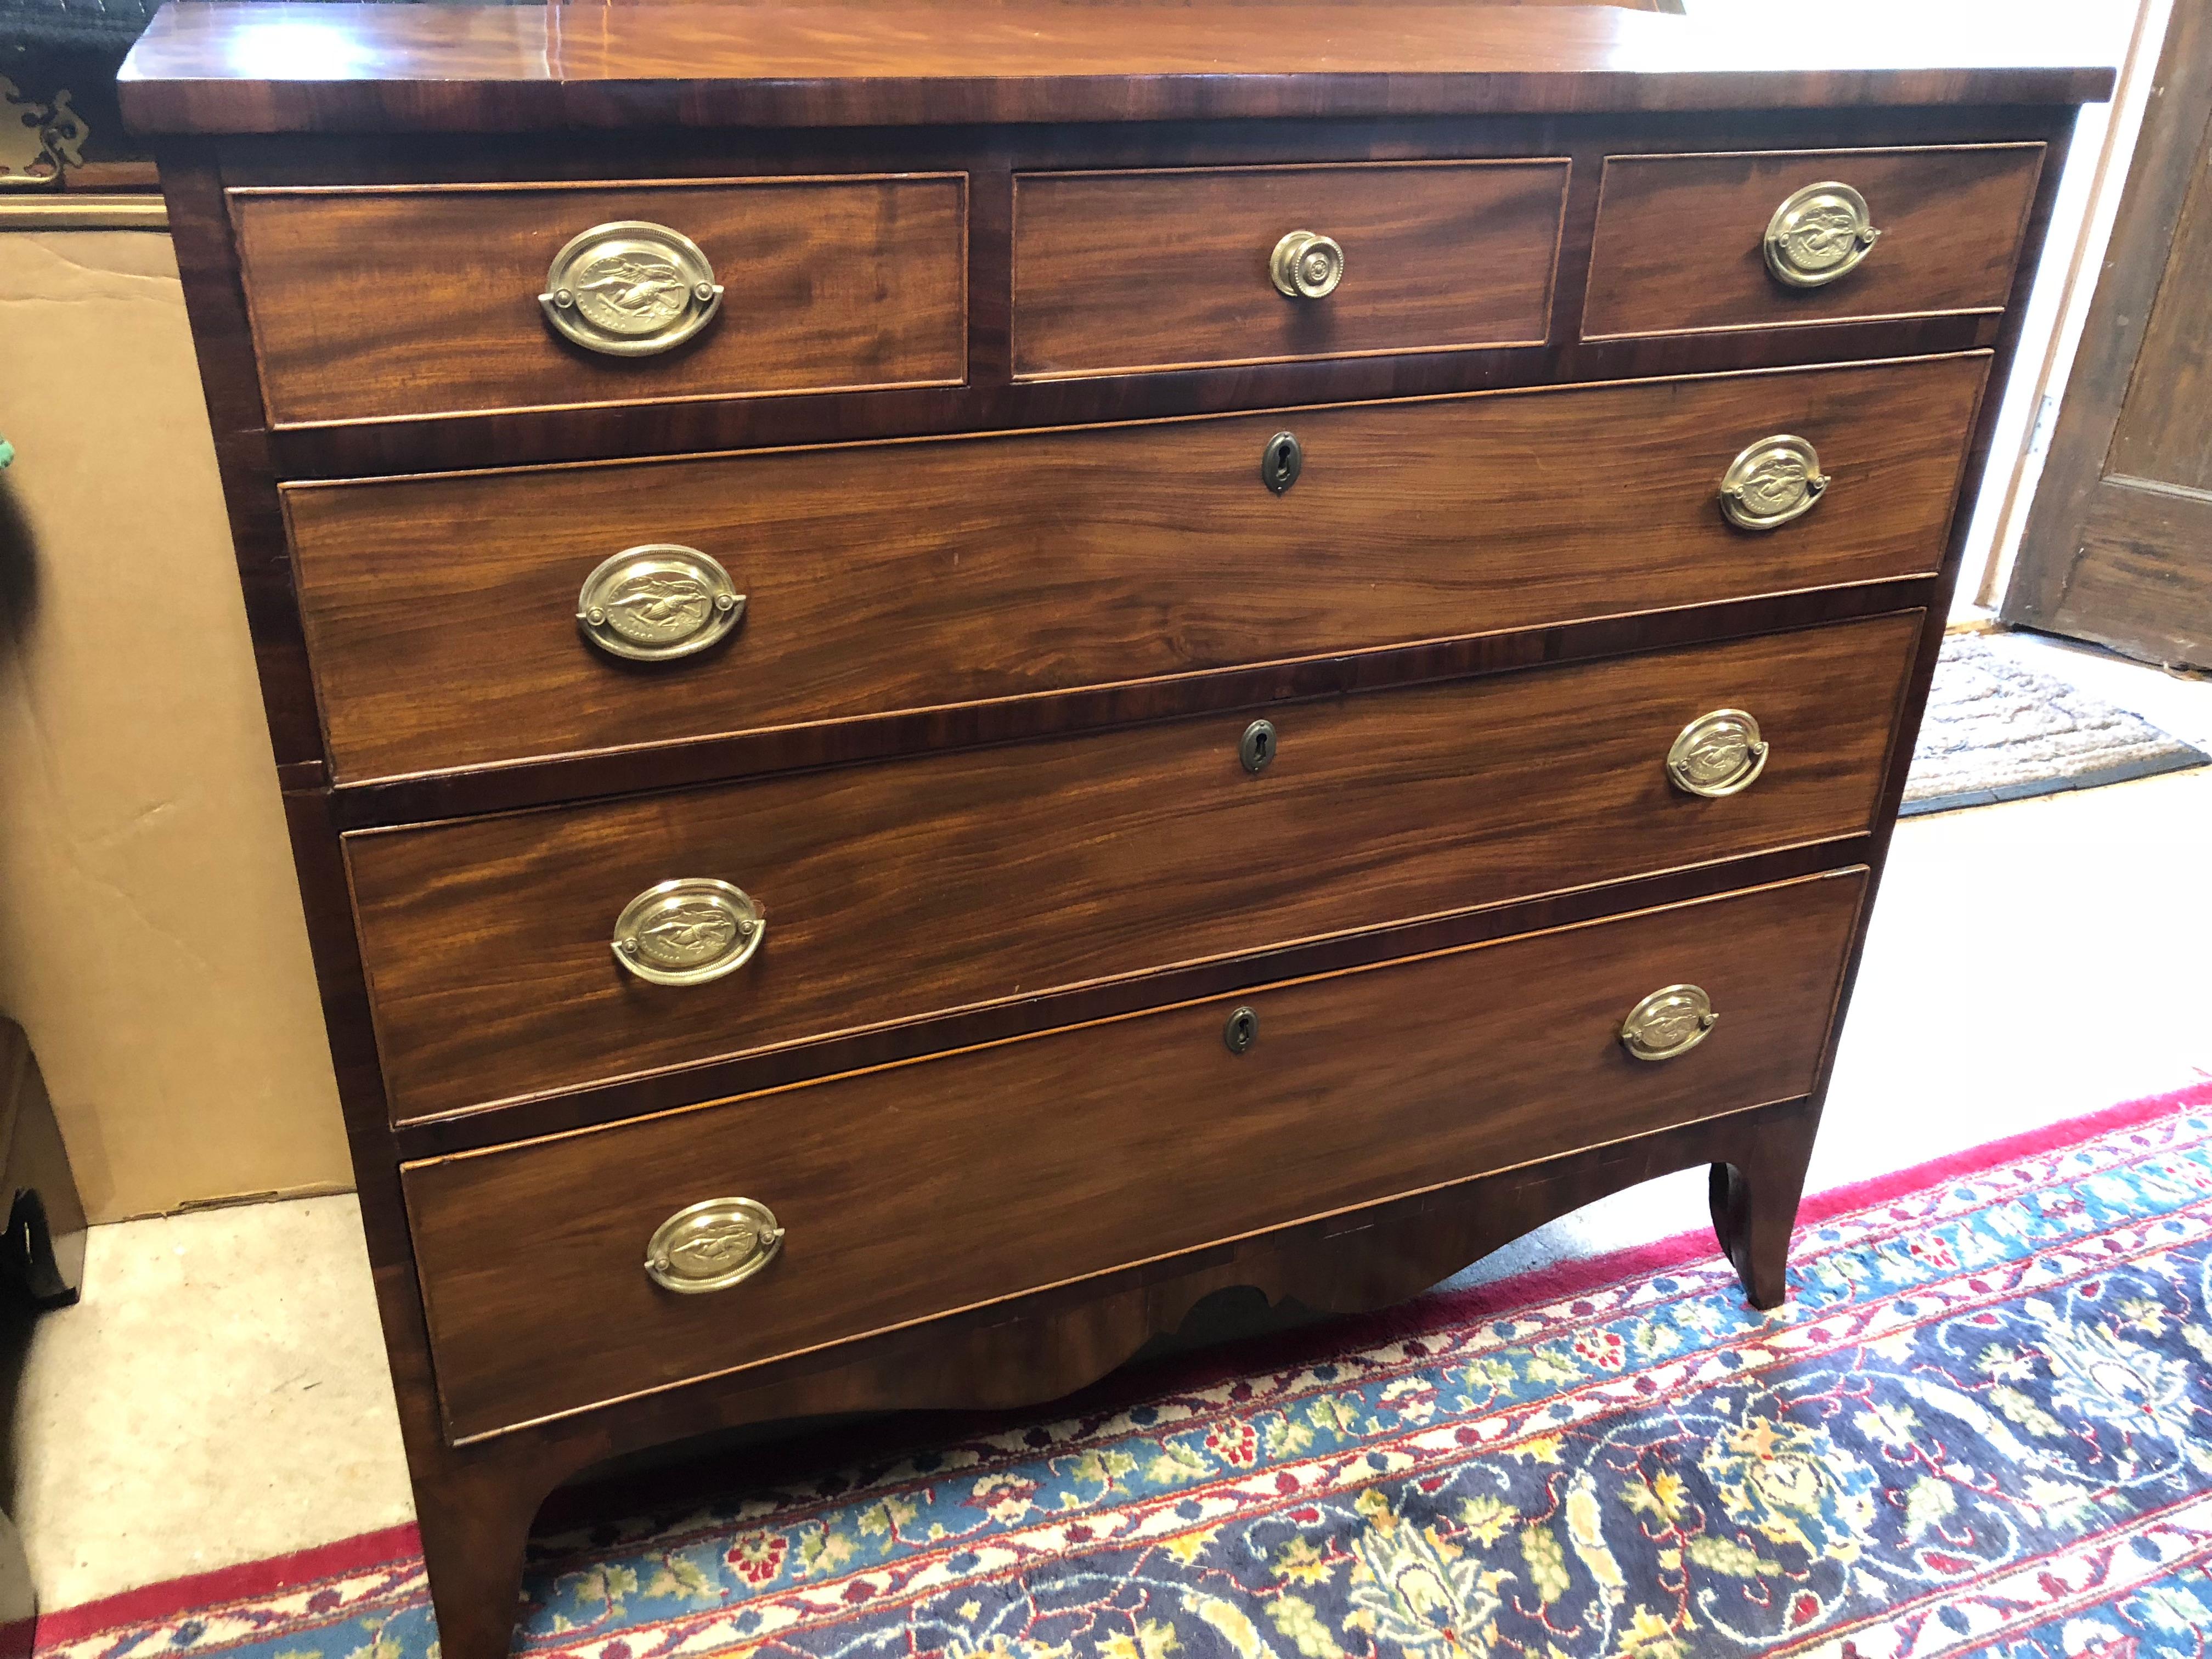 American Federal Hepplewhite chest with 3 top drawers, beautiful grained wood, nice color, period pulls, beautiful tall skirt, a horizontal shape, a nice Federal piece.